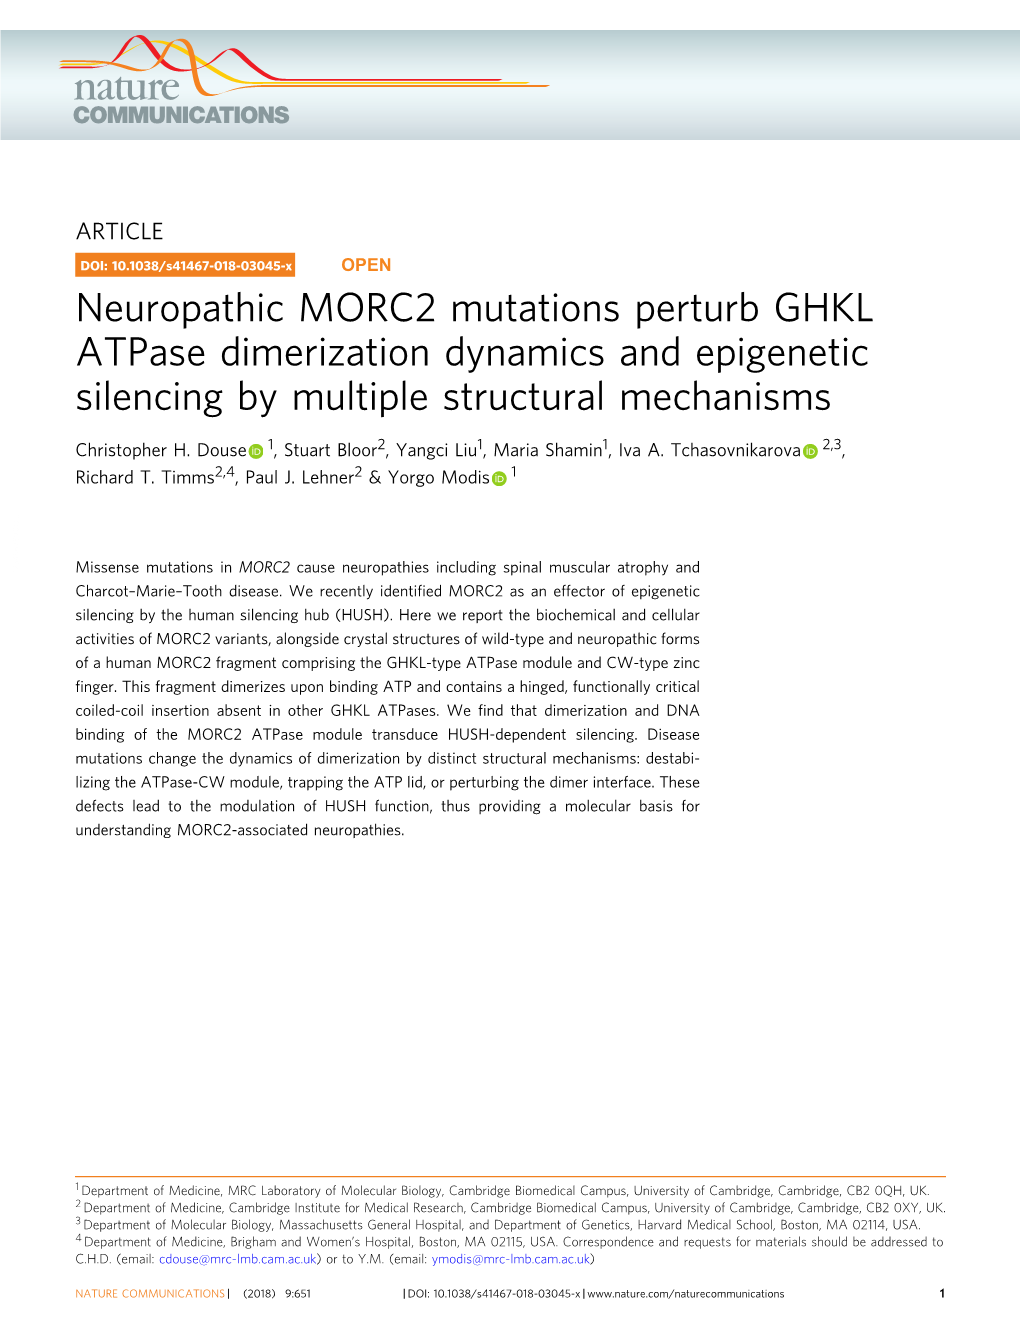 Neuropathic MORC2 Mutations Perturb GHKL Atpase Dimerization Dynamics and Epigenetic Silencing by Multiple Structural Mechanisms